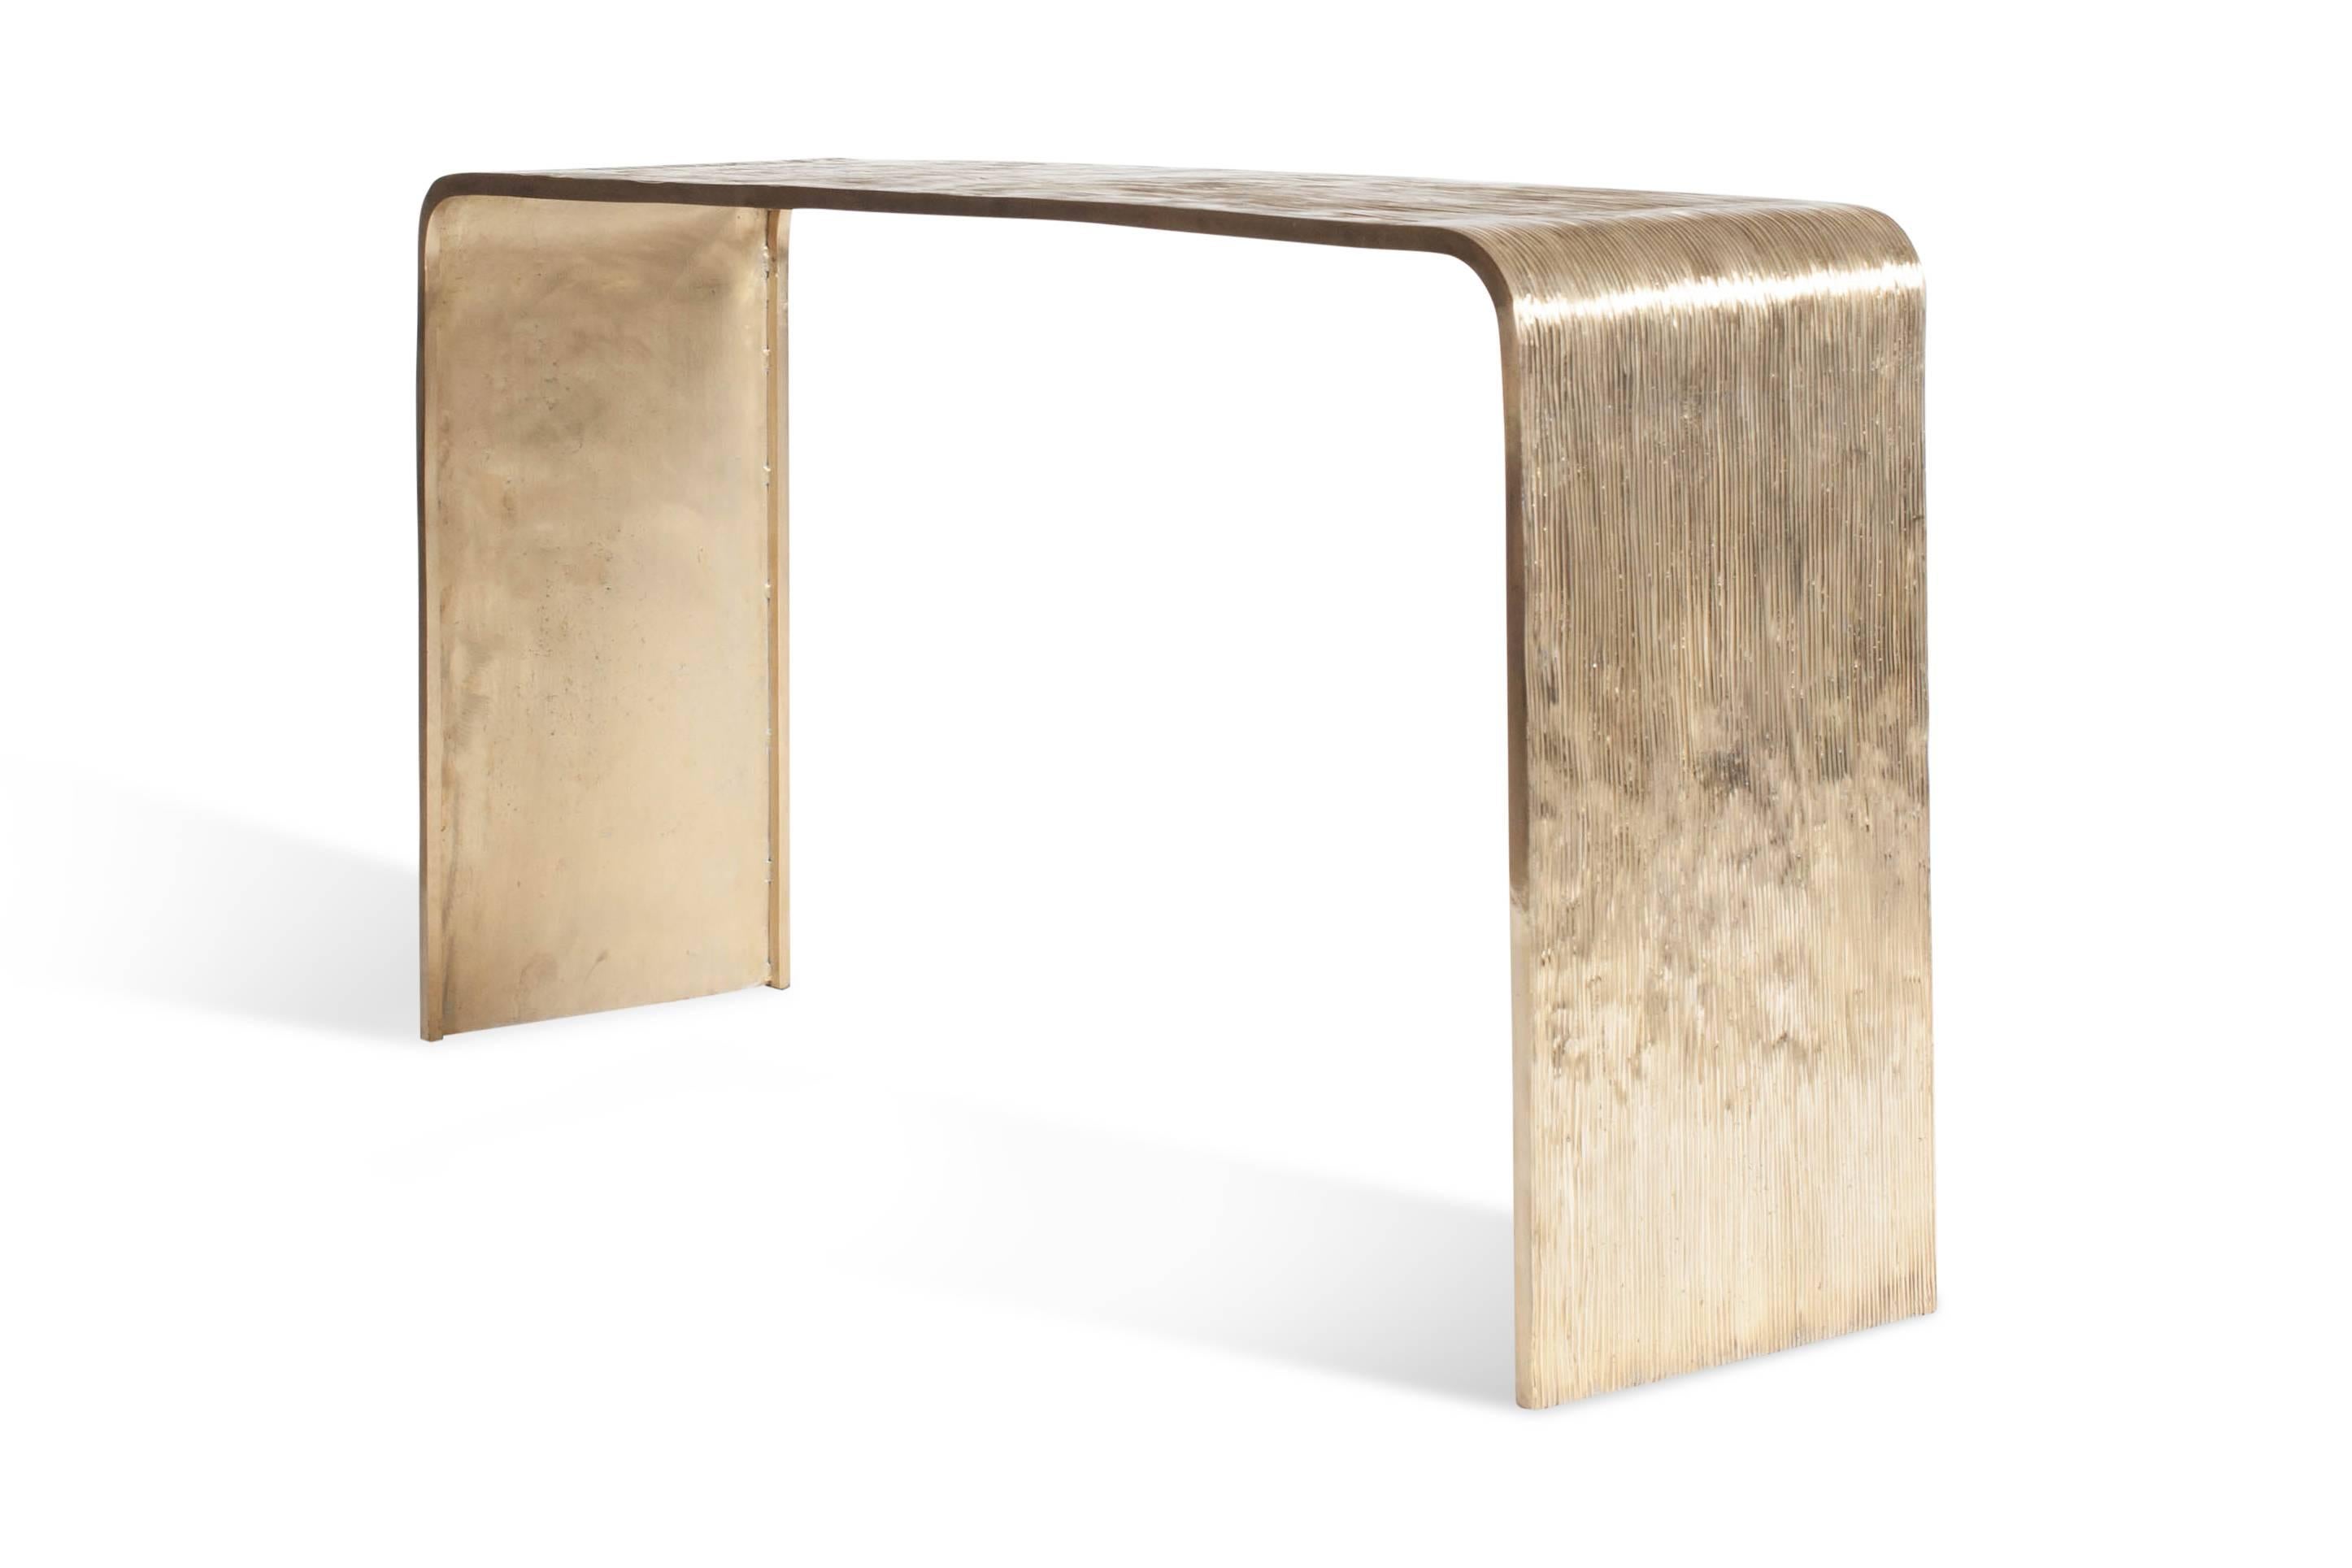 Bronze hand casted console table
A thin and irregular striped pattern give this piece a tactile and high end look
Luxury bronze decorative piece that can be used as a console table or desk.
Our studio designed these pieces as we see them as a